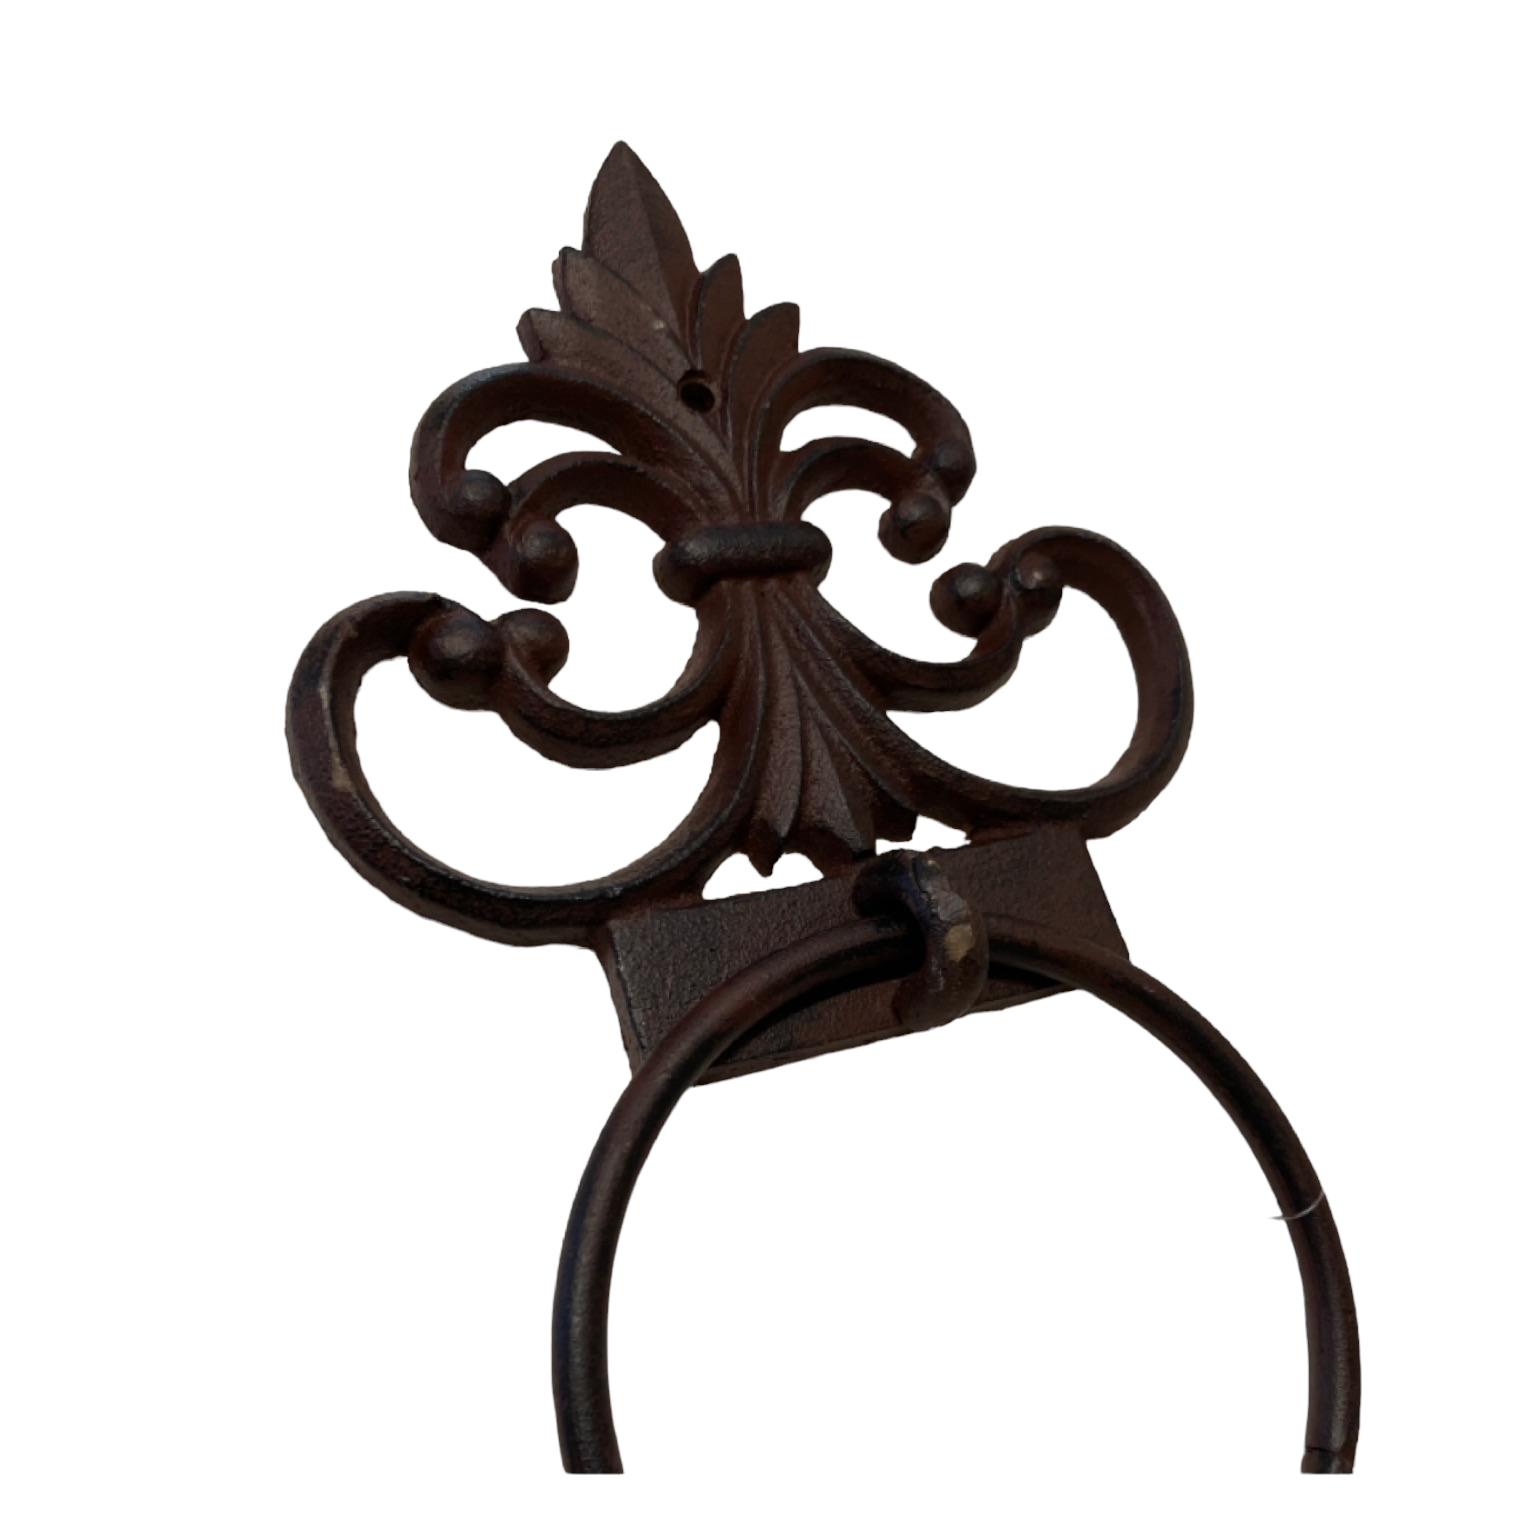 Towel Holder Vintage Iron - The Renmy Store Homewares & Gifts 